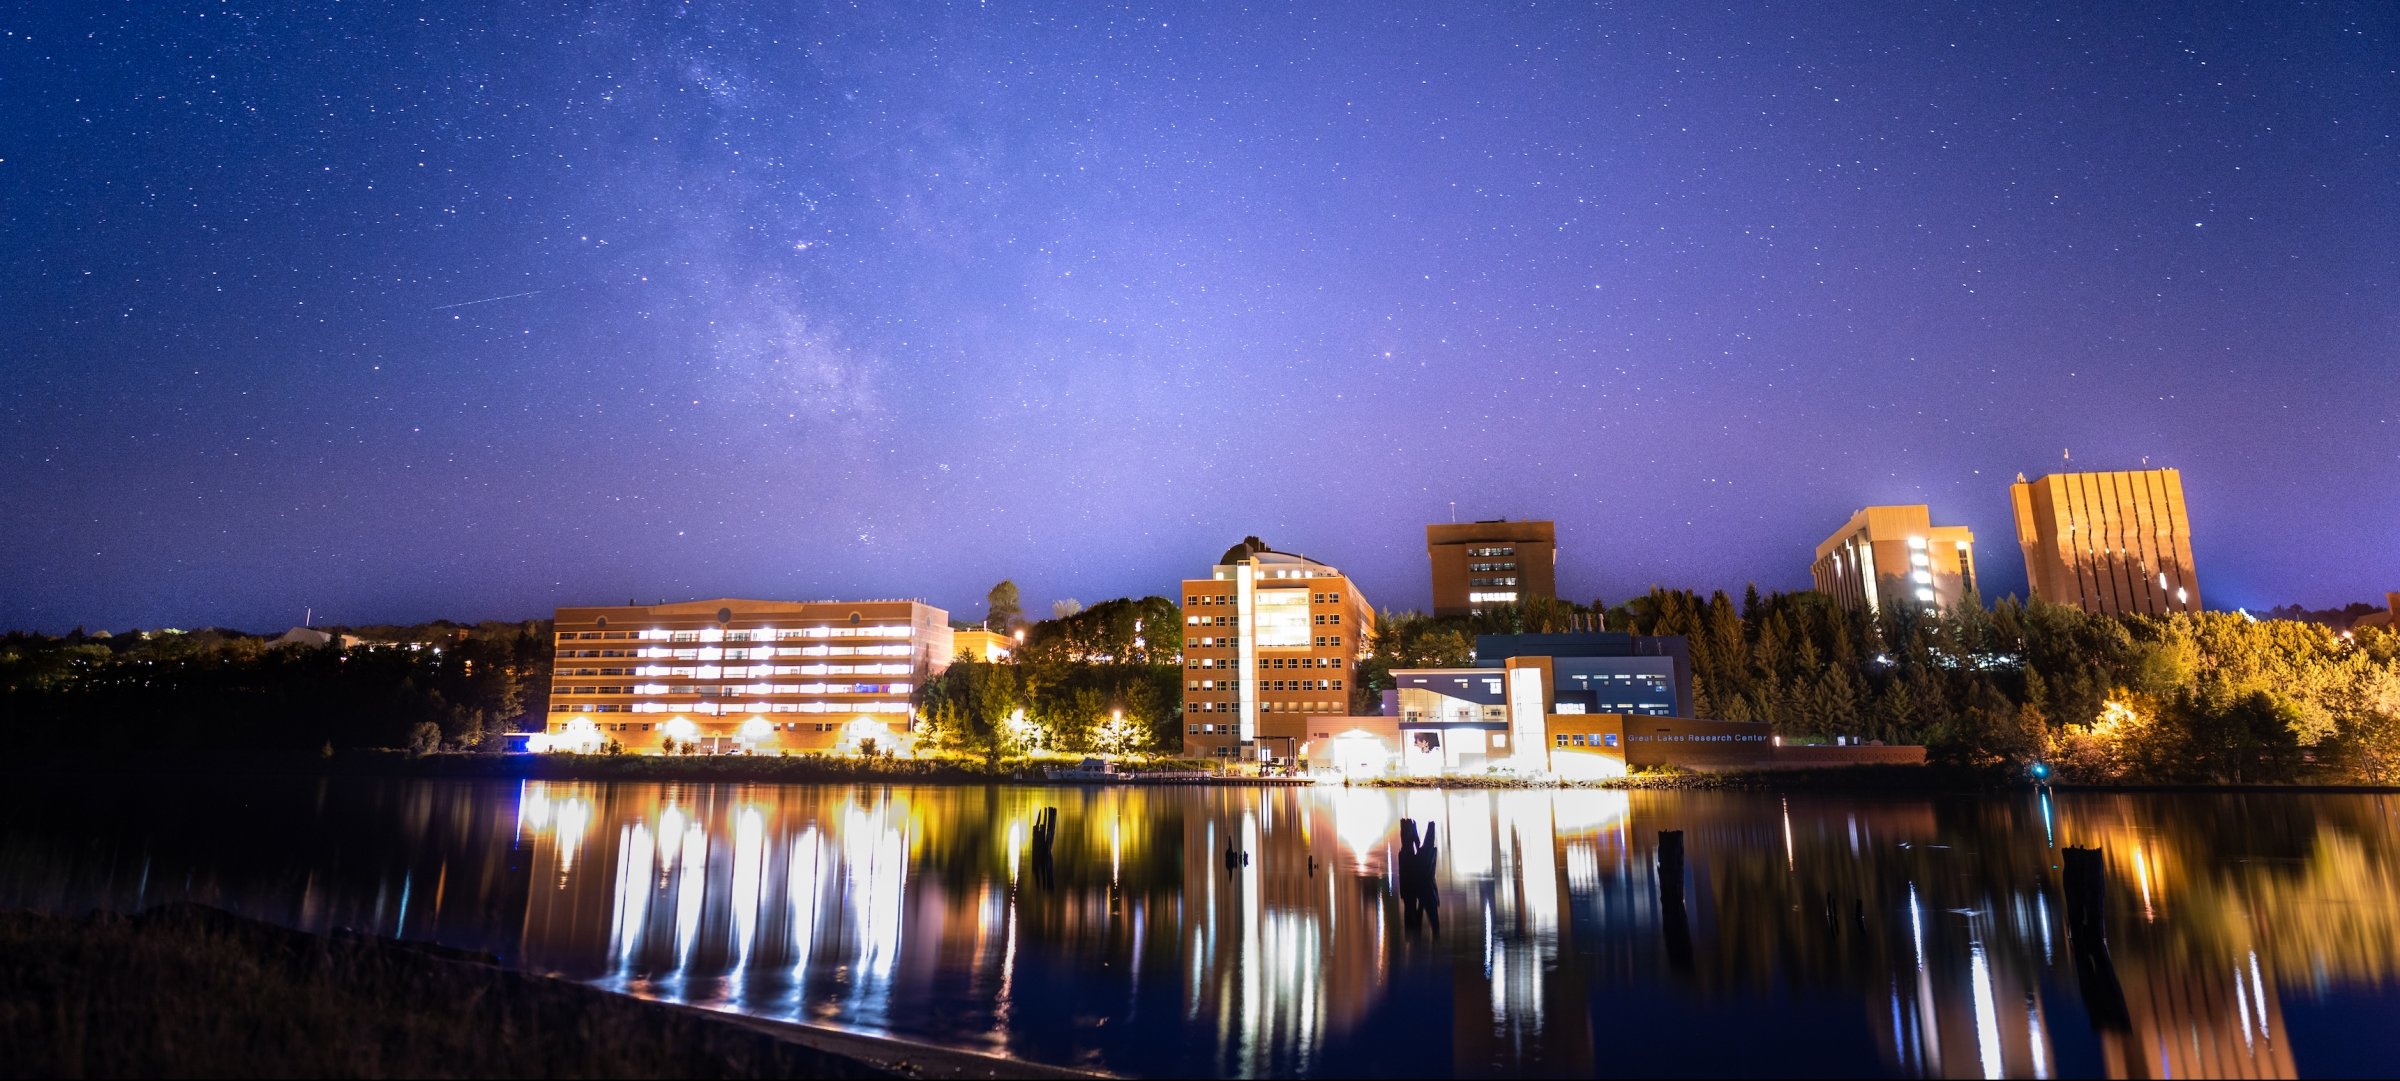 View of Michigan Tech campus and Portage Canal at night with the Milky Way.